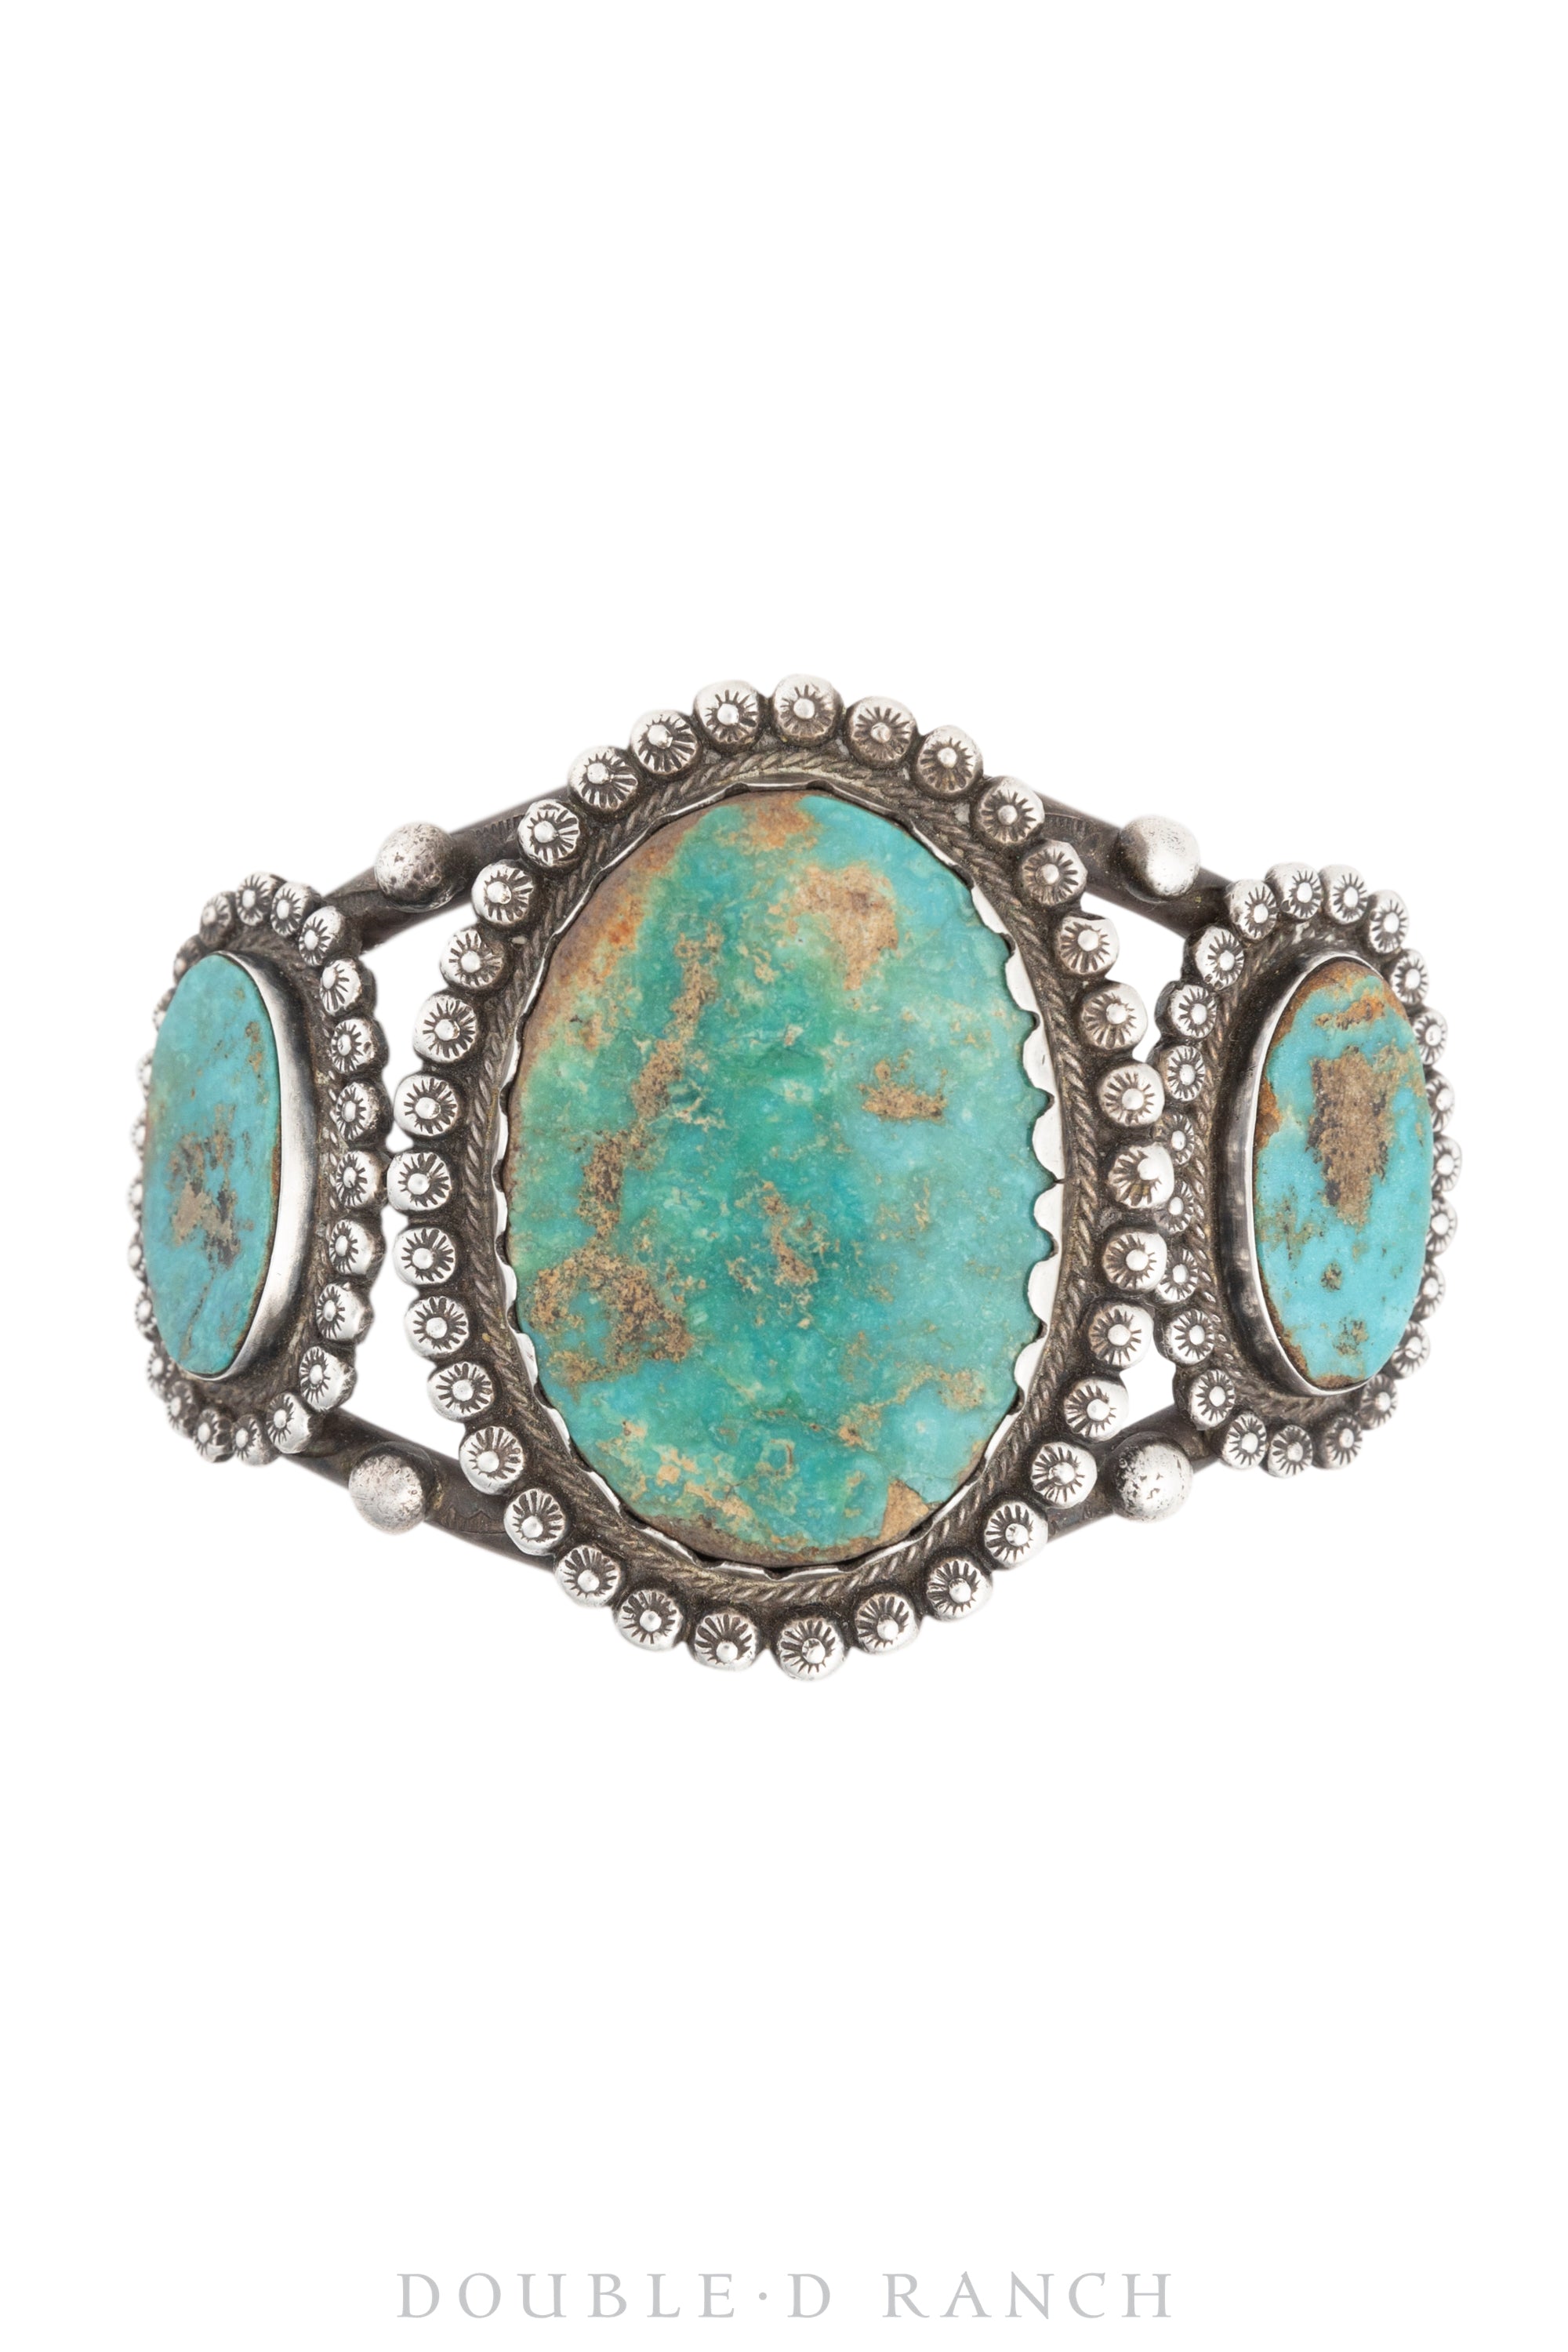 Cuff, Natural Stone, Turquoise, 3 Stones, Incredible Bezels, Vintage ‘30s, 3629